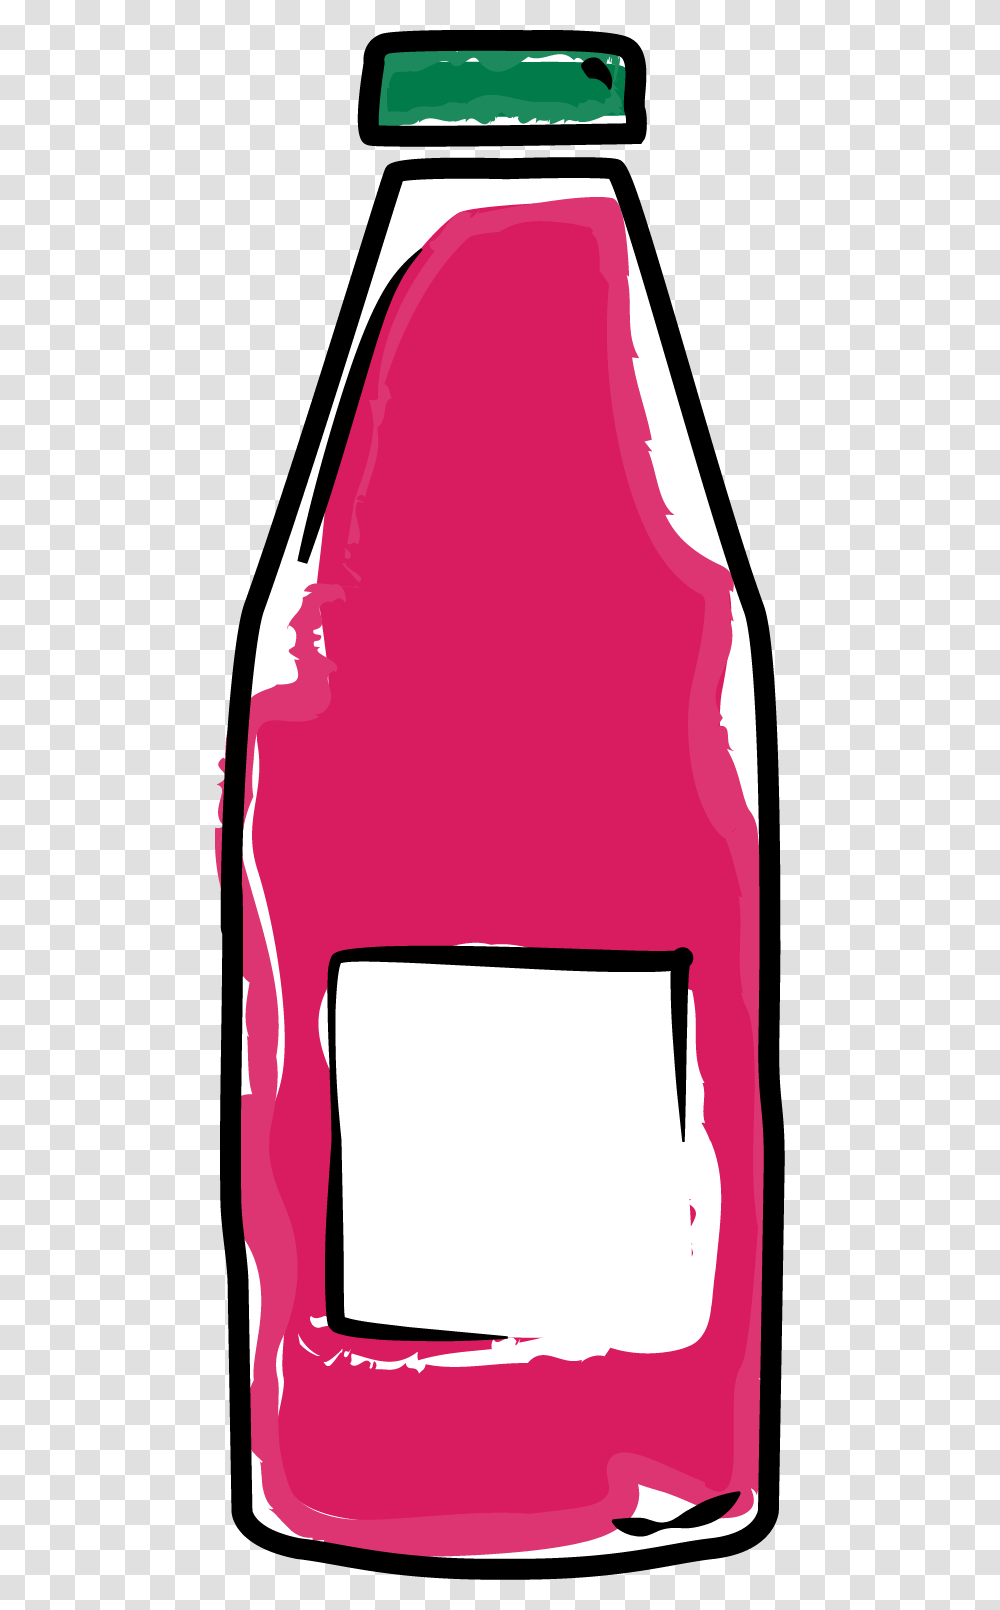 For Easy Mix Drinks You Can Whip Up, Apparel, Bag, Handbag Transparent Png